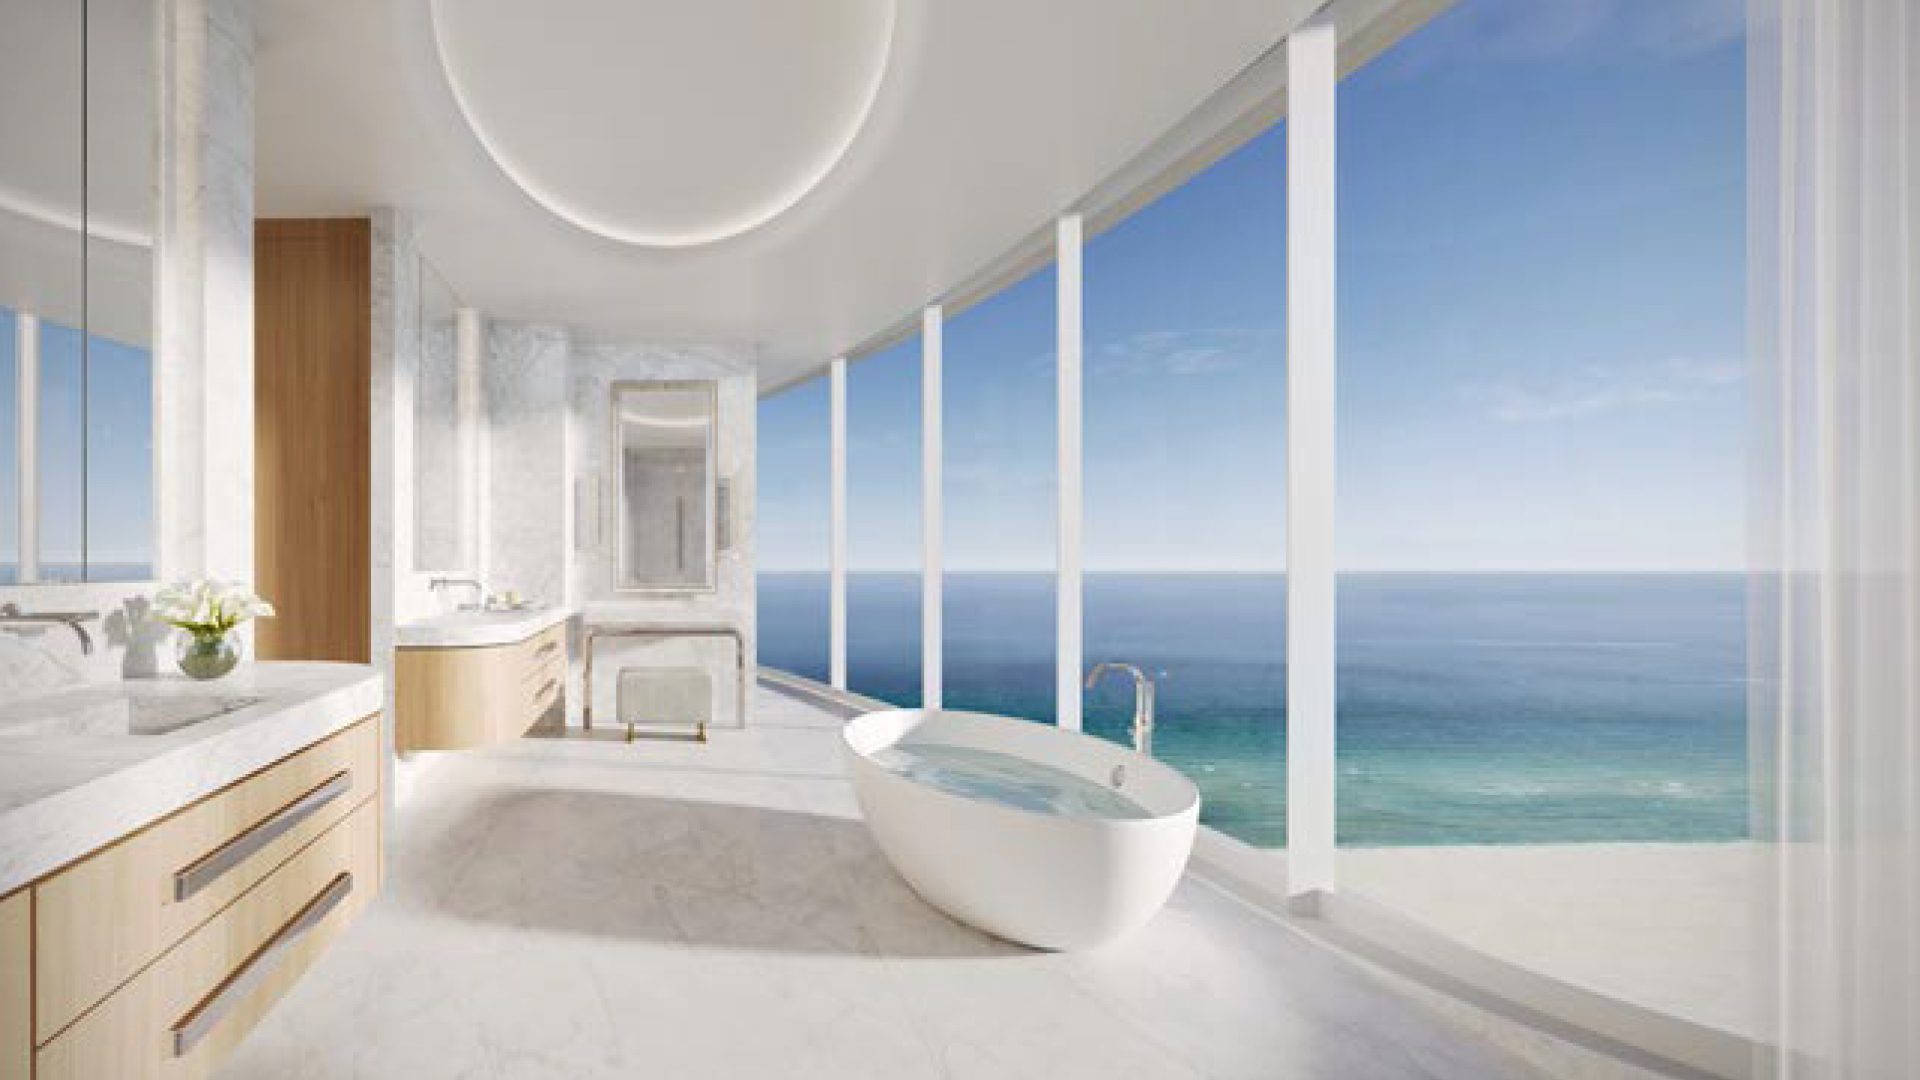 View from the Master Bathroom at The Shoreclub Miami Beach